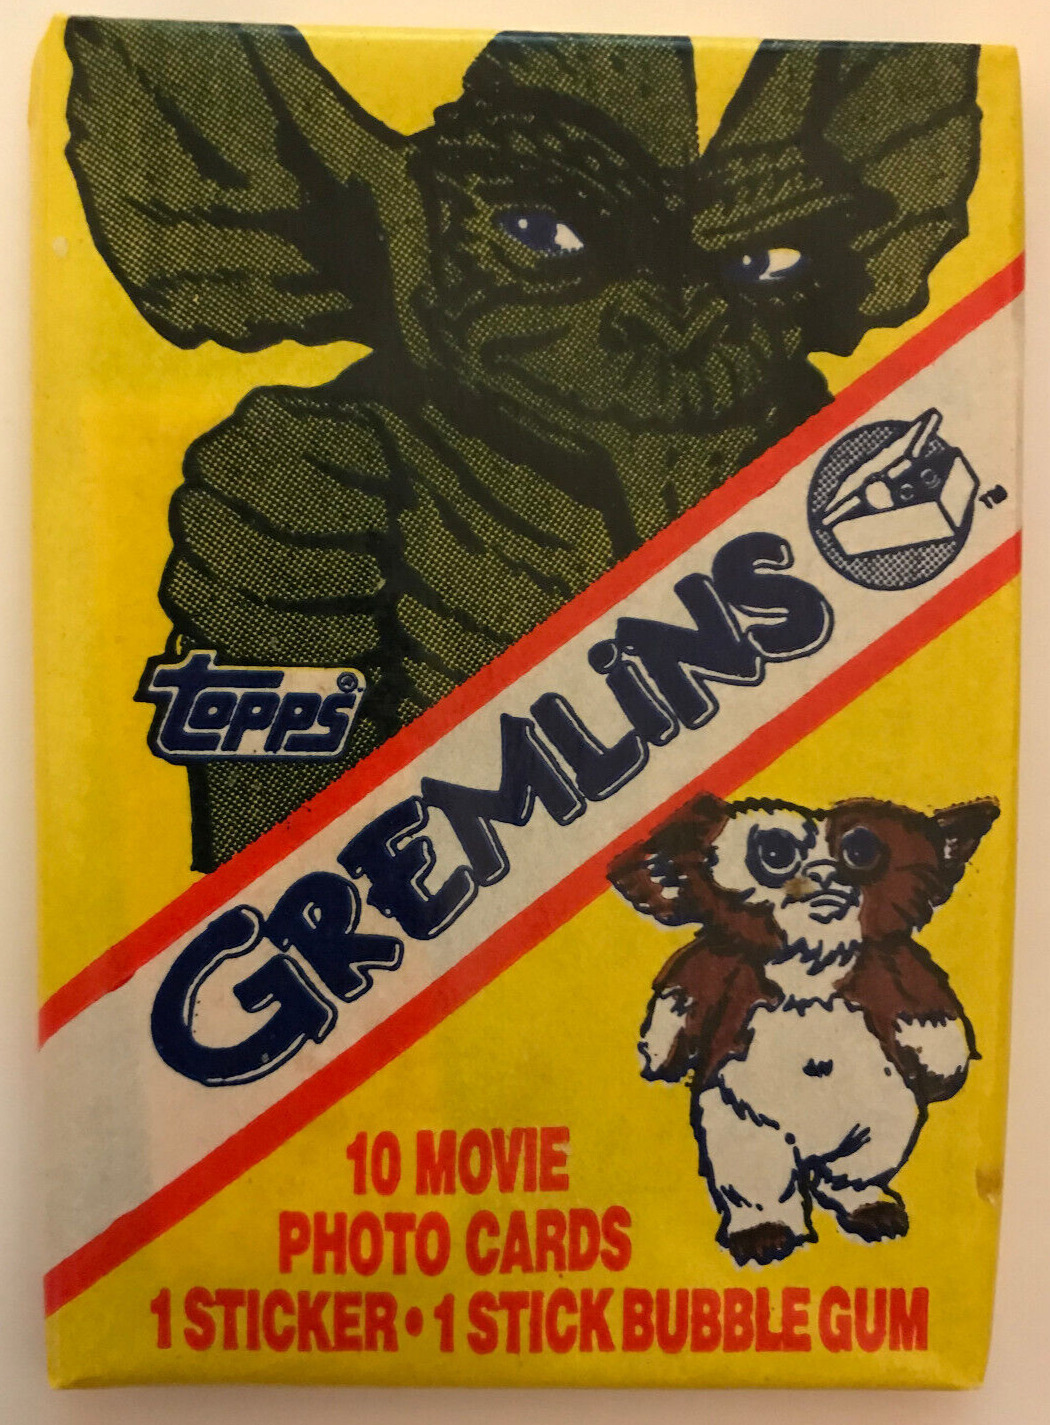 1984 Topps Gremlins Trading Cards Sealed Wax PACK From Box, 10 Cards, 1 Sticker